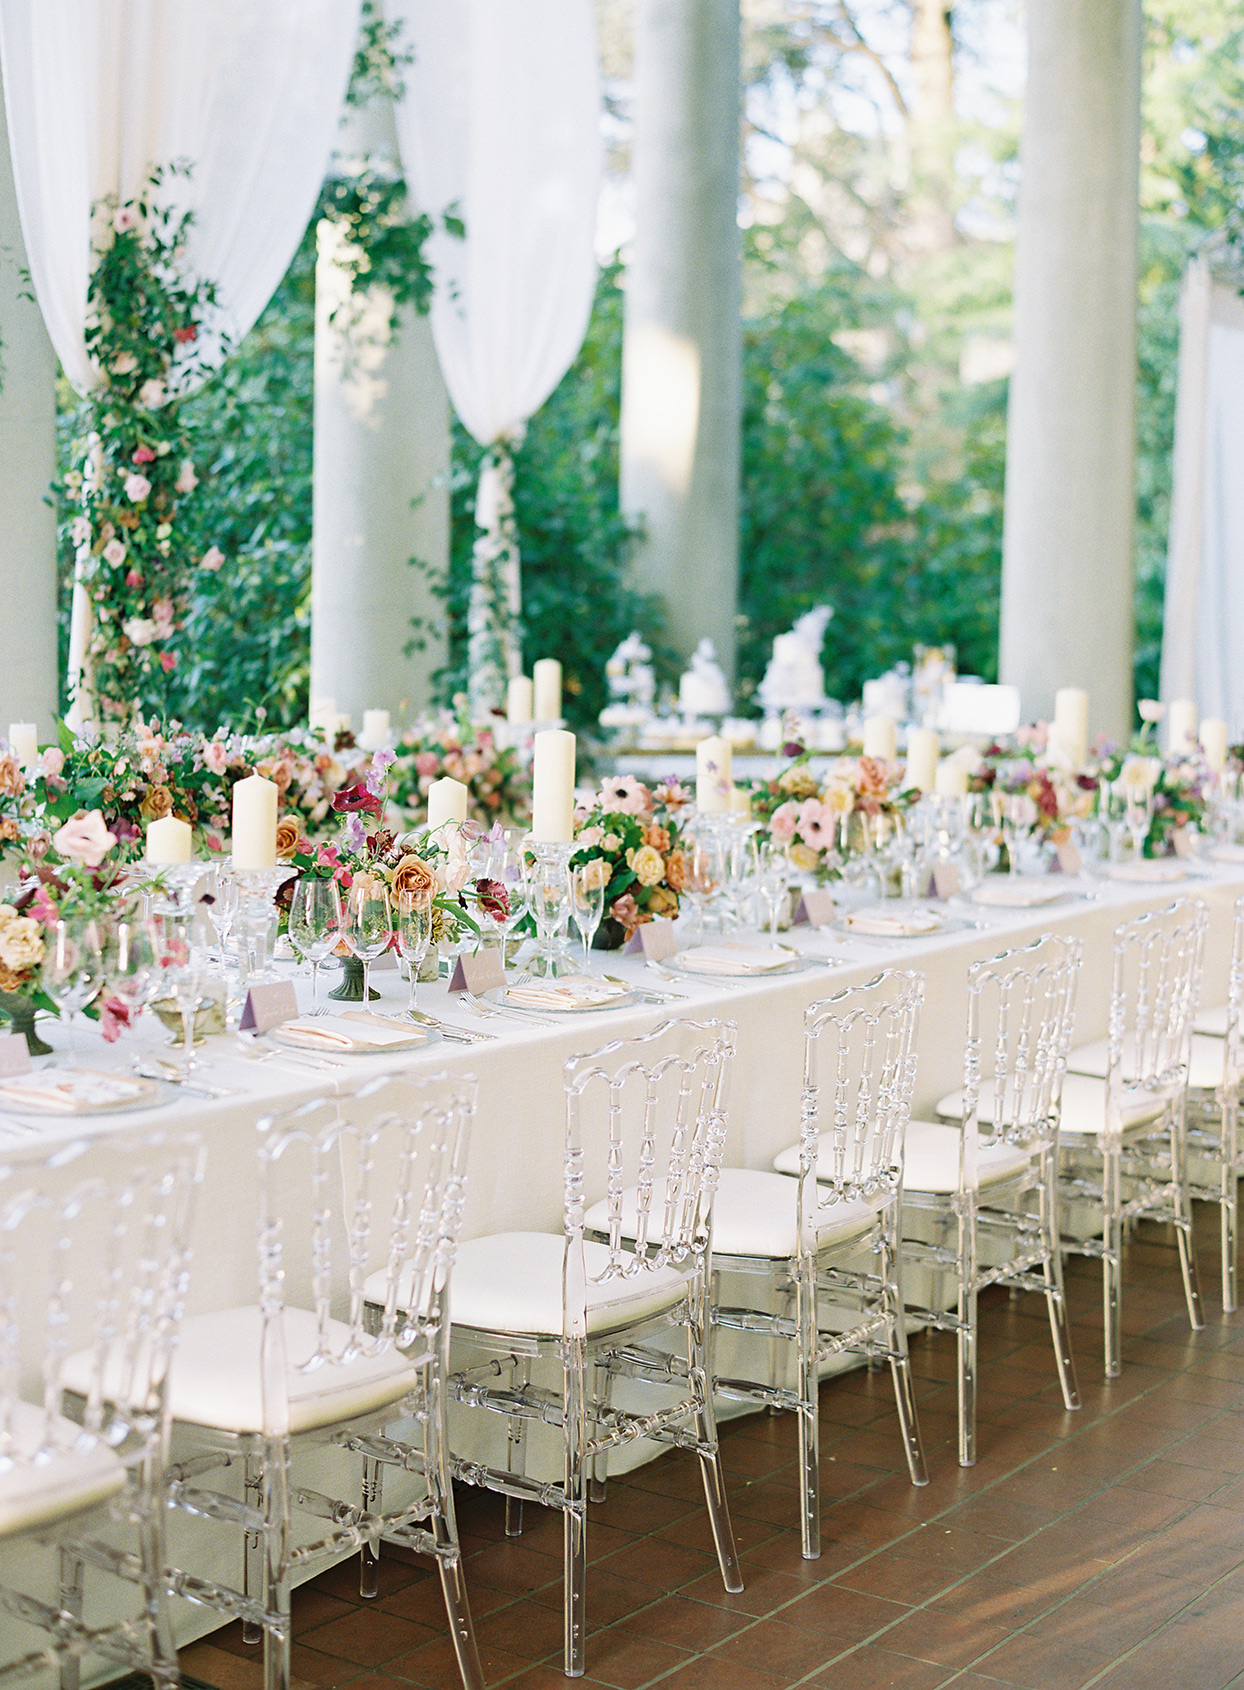 How To Prepare Your Wedding Table Layouts And Floor Plans